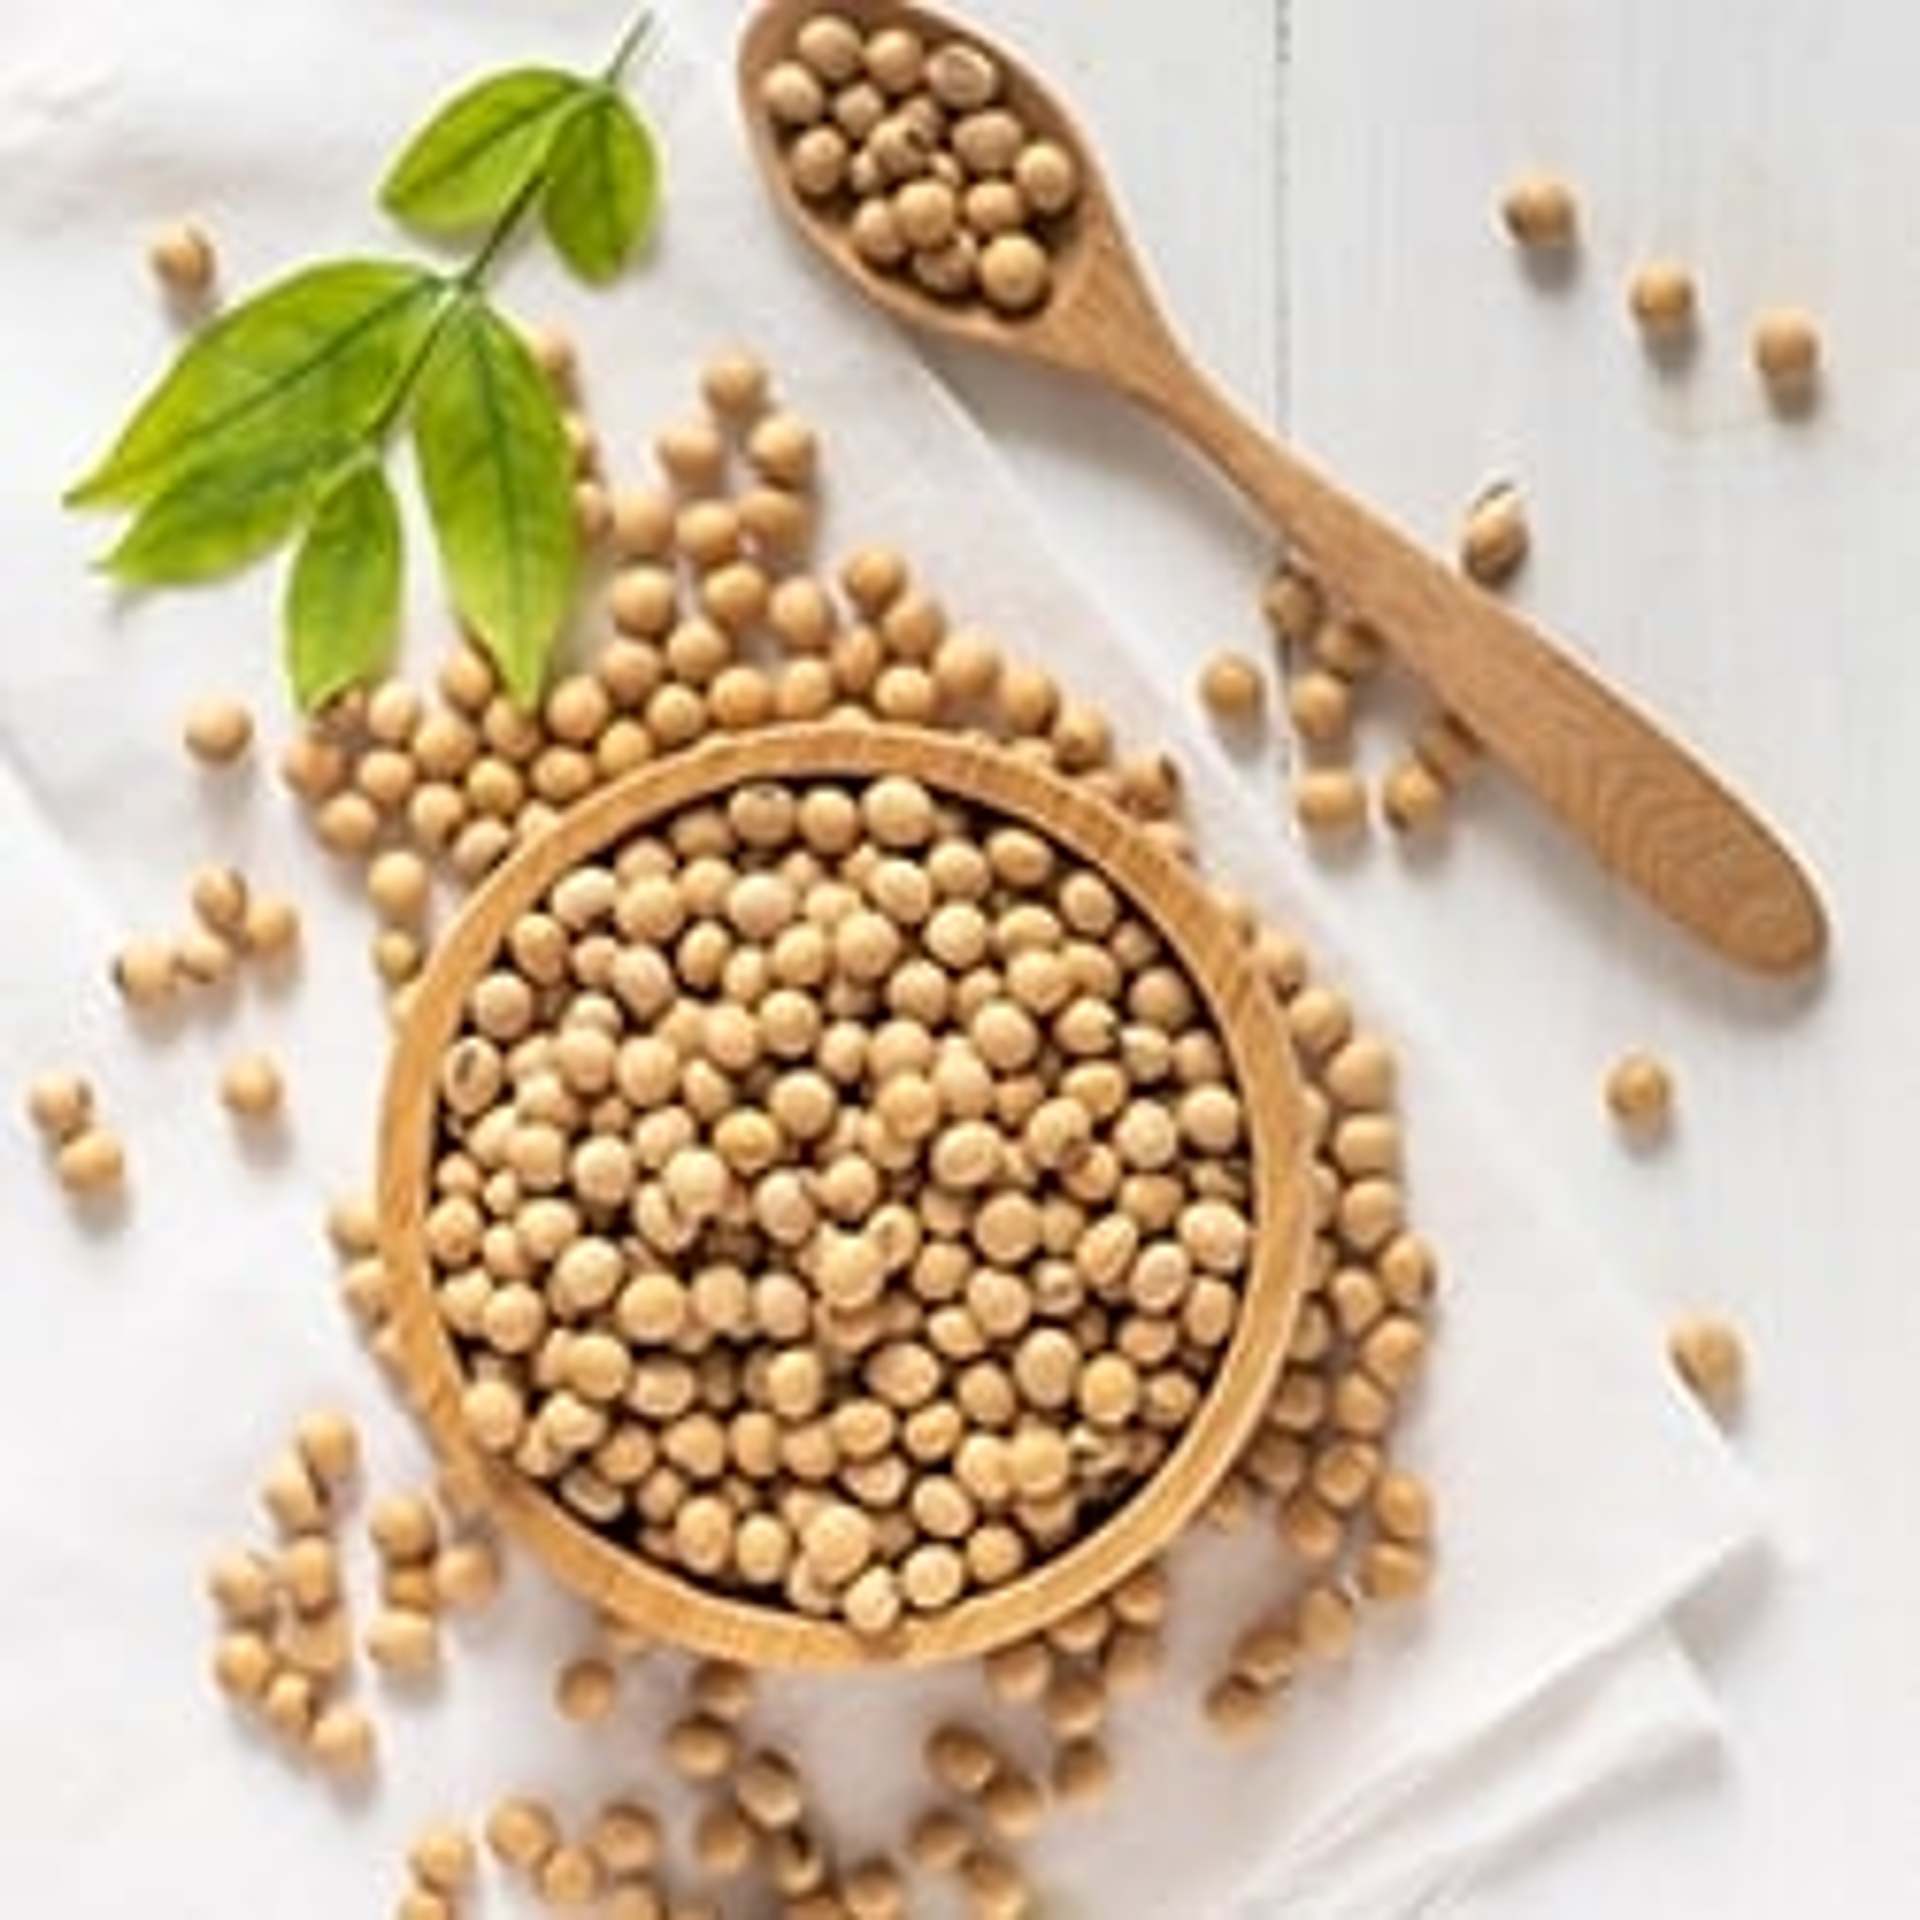 Soy protein is ideal for people with milk and egg allergies and is also suitable as a meat substitute.